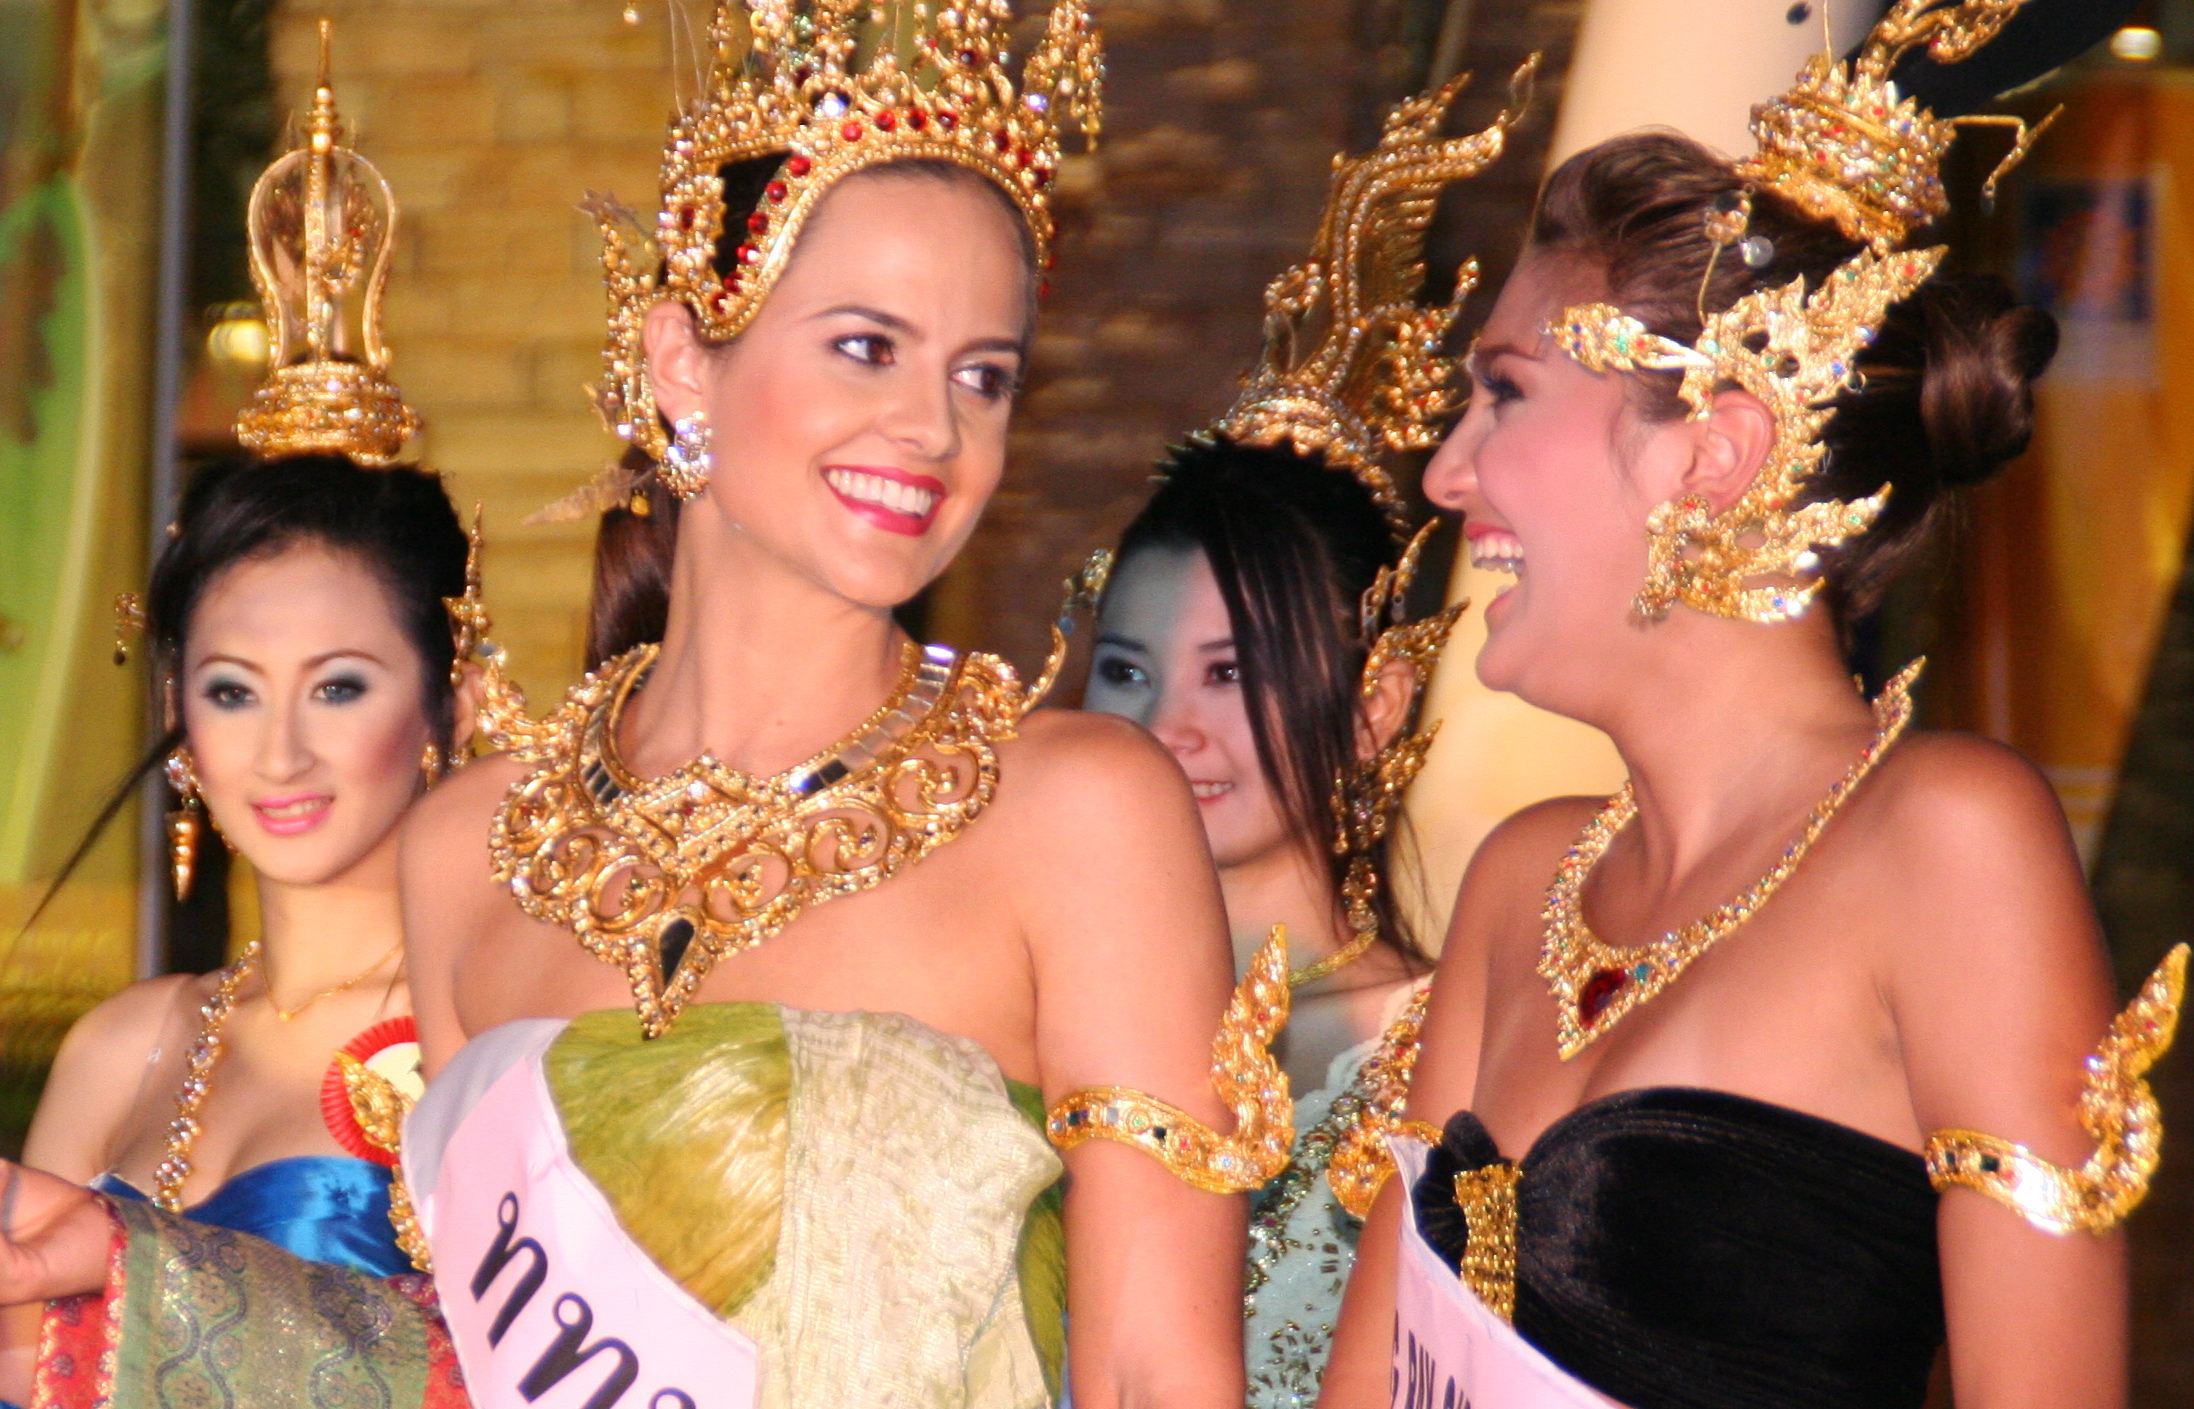 Amanda Michaels representing the Tourism Authority of Thailand in the Miss Songkran International Pageant